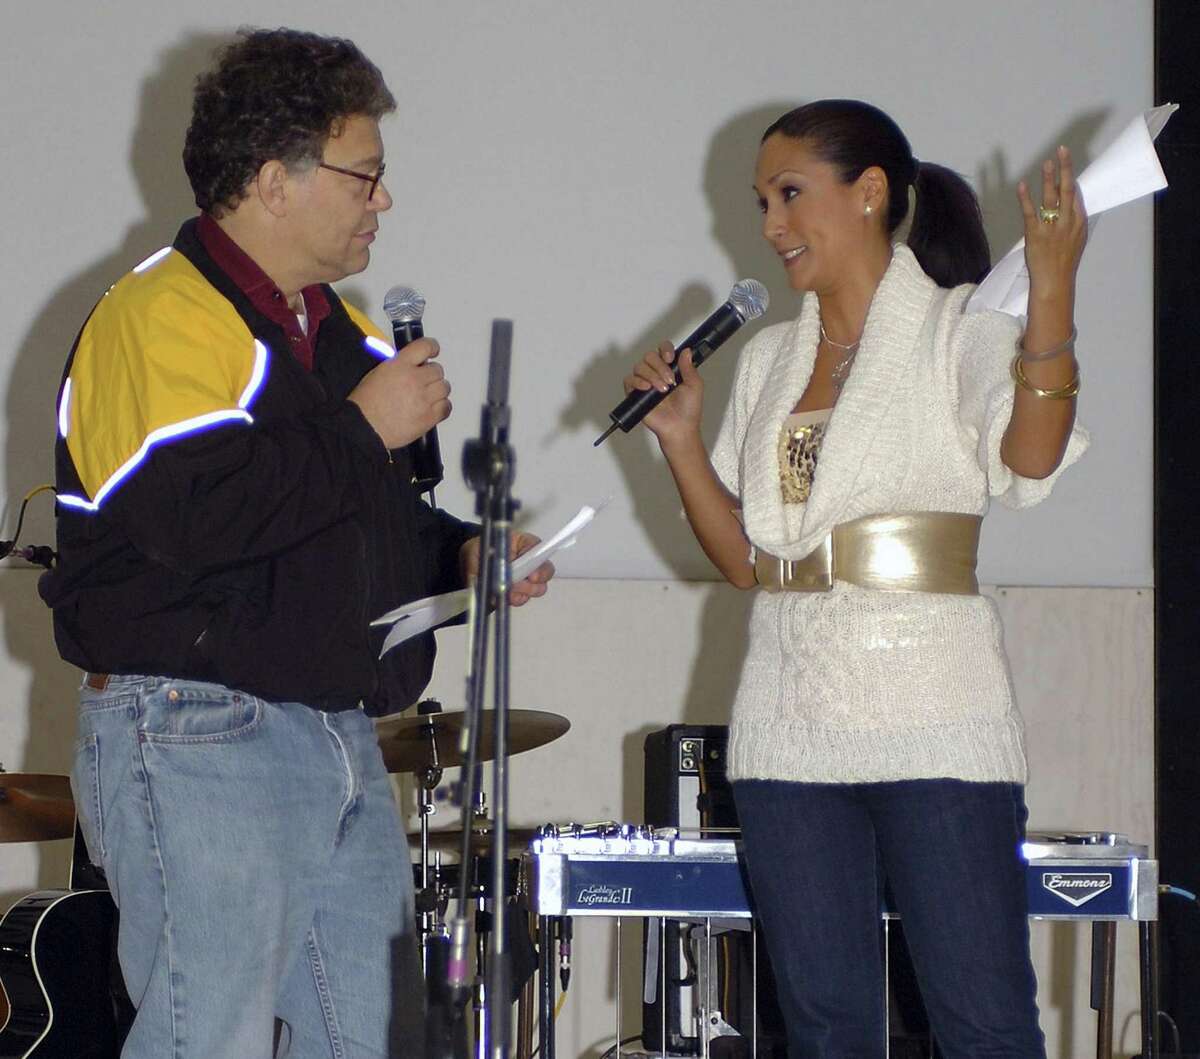 In this image provided by the U.S. Army, then-comedian Al Franken and sports commentator Leeann Tweeden perform a comic skit at Forward Operating Base Marez in Mosul, Iraq, on Dec. 16, 2006, during the USO Sergeant Major of the Army's 2006 Hope and Freedom Tour. Sen. Al Franken, D-Minn., apologized Nov. 16, 2017, after Tweeden accused him of forcibly kissing her during the 2006 USO tour. Colleagues, including fellow Democrats, urged a Senate ethics investigation. Tweeden also accused Franken of posing for a photo with his hands on her breasts as she slept, while both were performing for military personnel two years before the one-time comedian was elected to the Senate. (Creighton Holub/U.S. Army via AP)